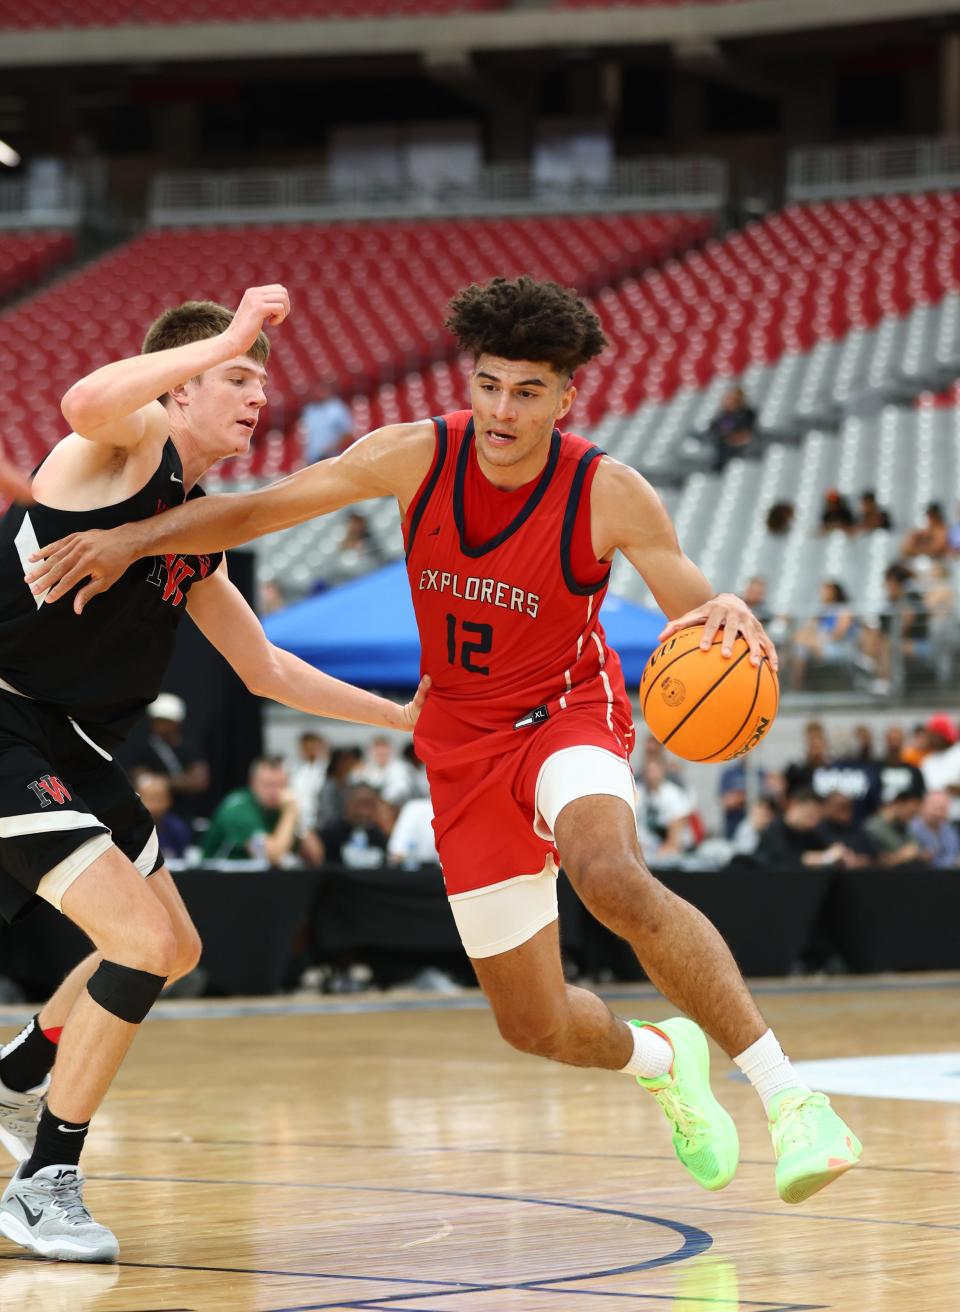 Columbus player Cameron Boozer (12) during the Section 7 high school boys tournament at State Farm Stadium in Glendale, Arizona, in June 2023.